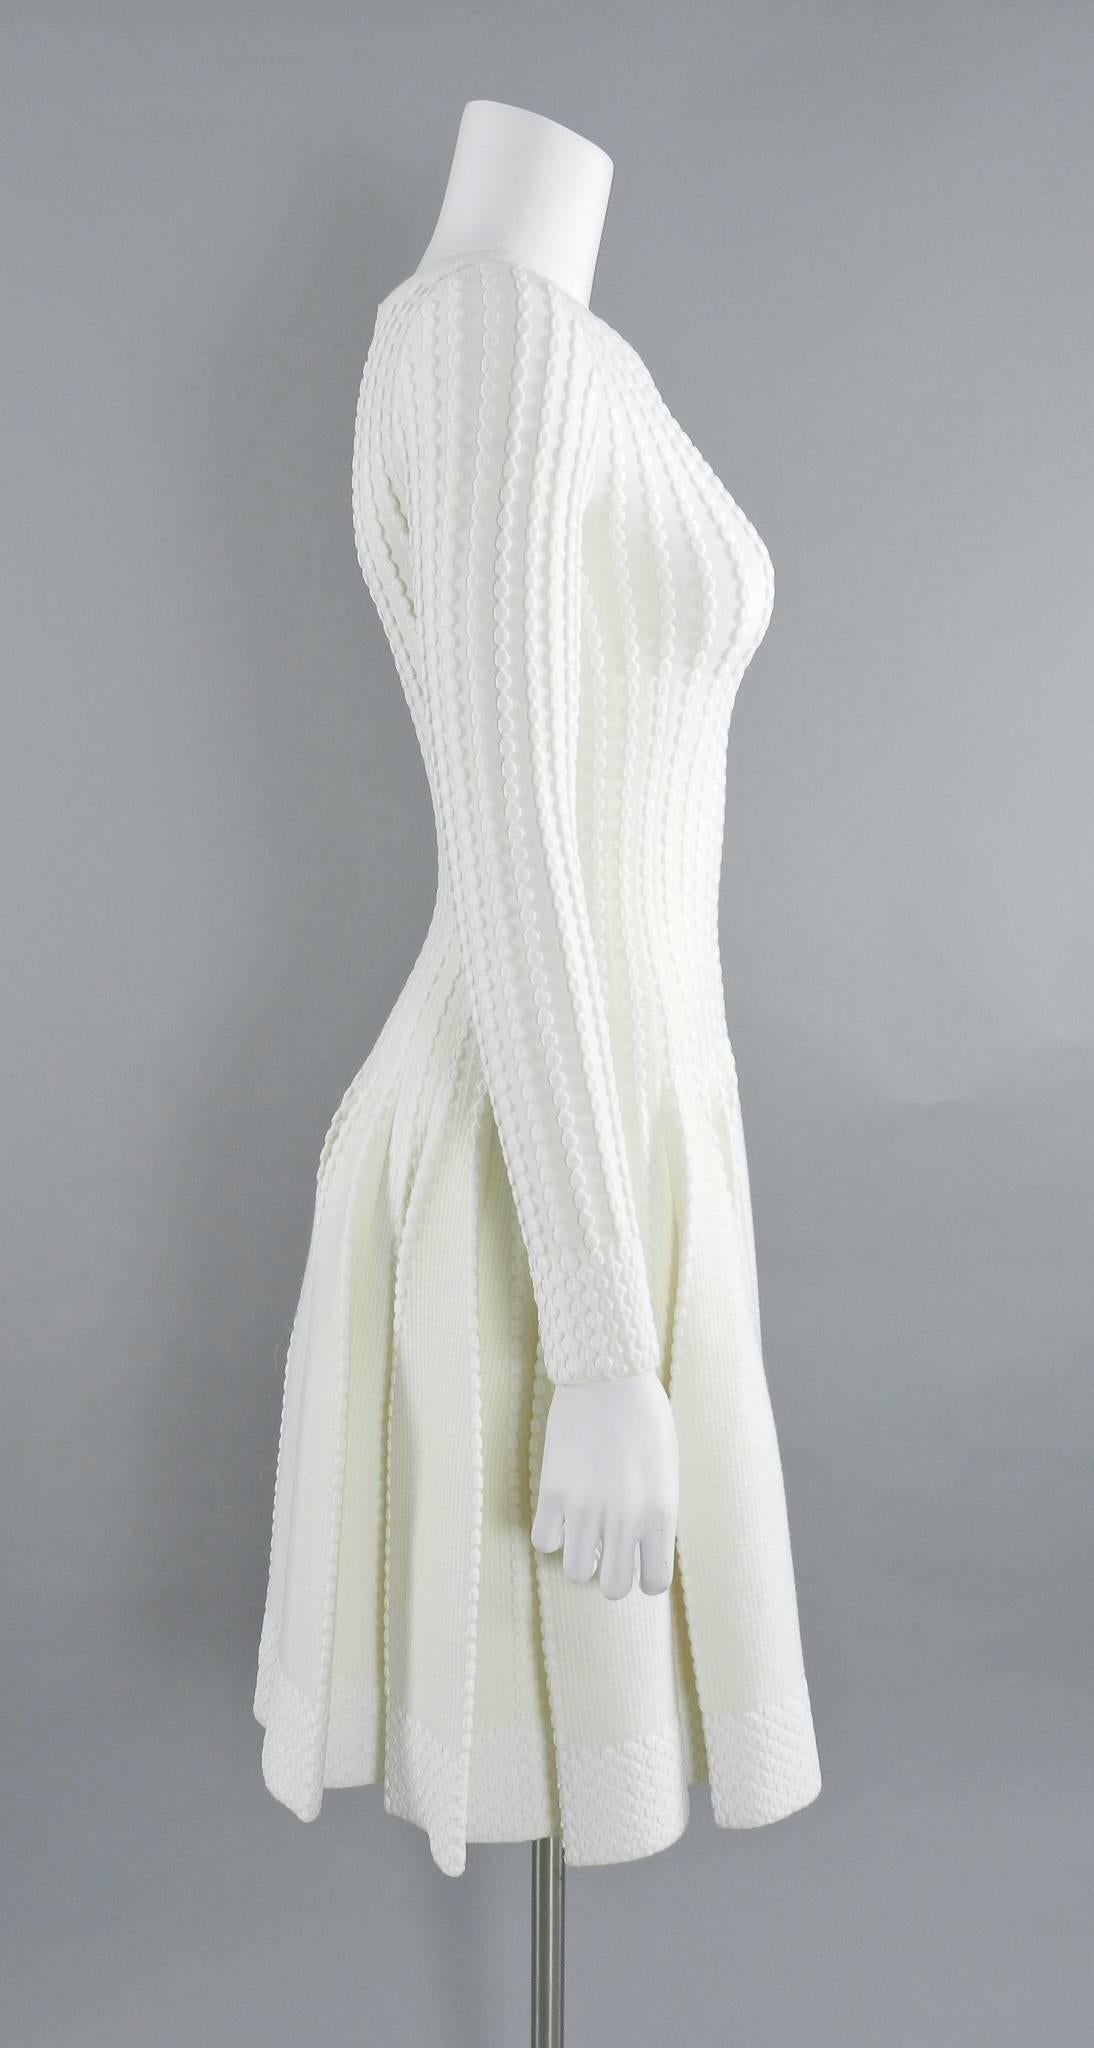 Azzedine Alaia ivory stretch knit bodycon fit and flare dress. Zipper down centre back, long sleeves, textured design. Tagged size FR 38 (Alaia runs small and this is best for a size S - USA 4/6). To fit 34